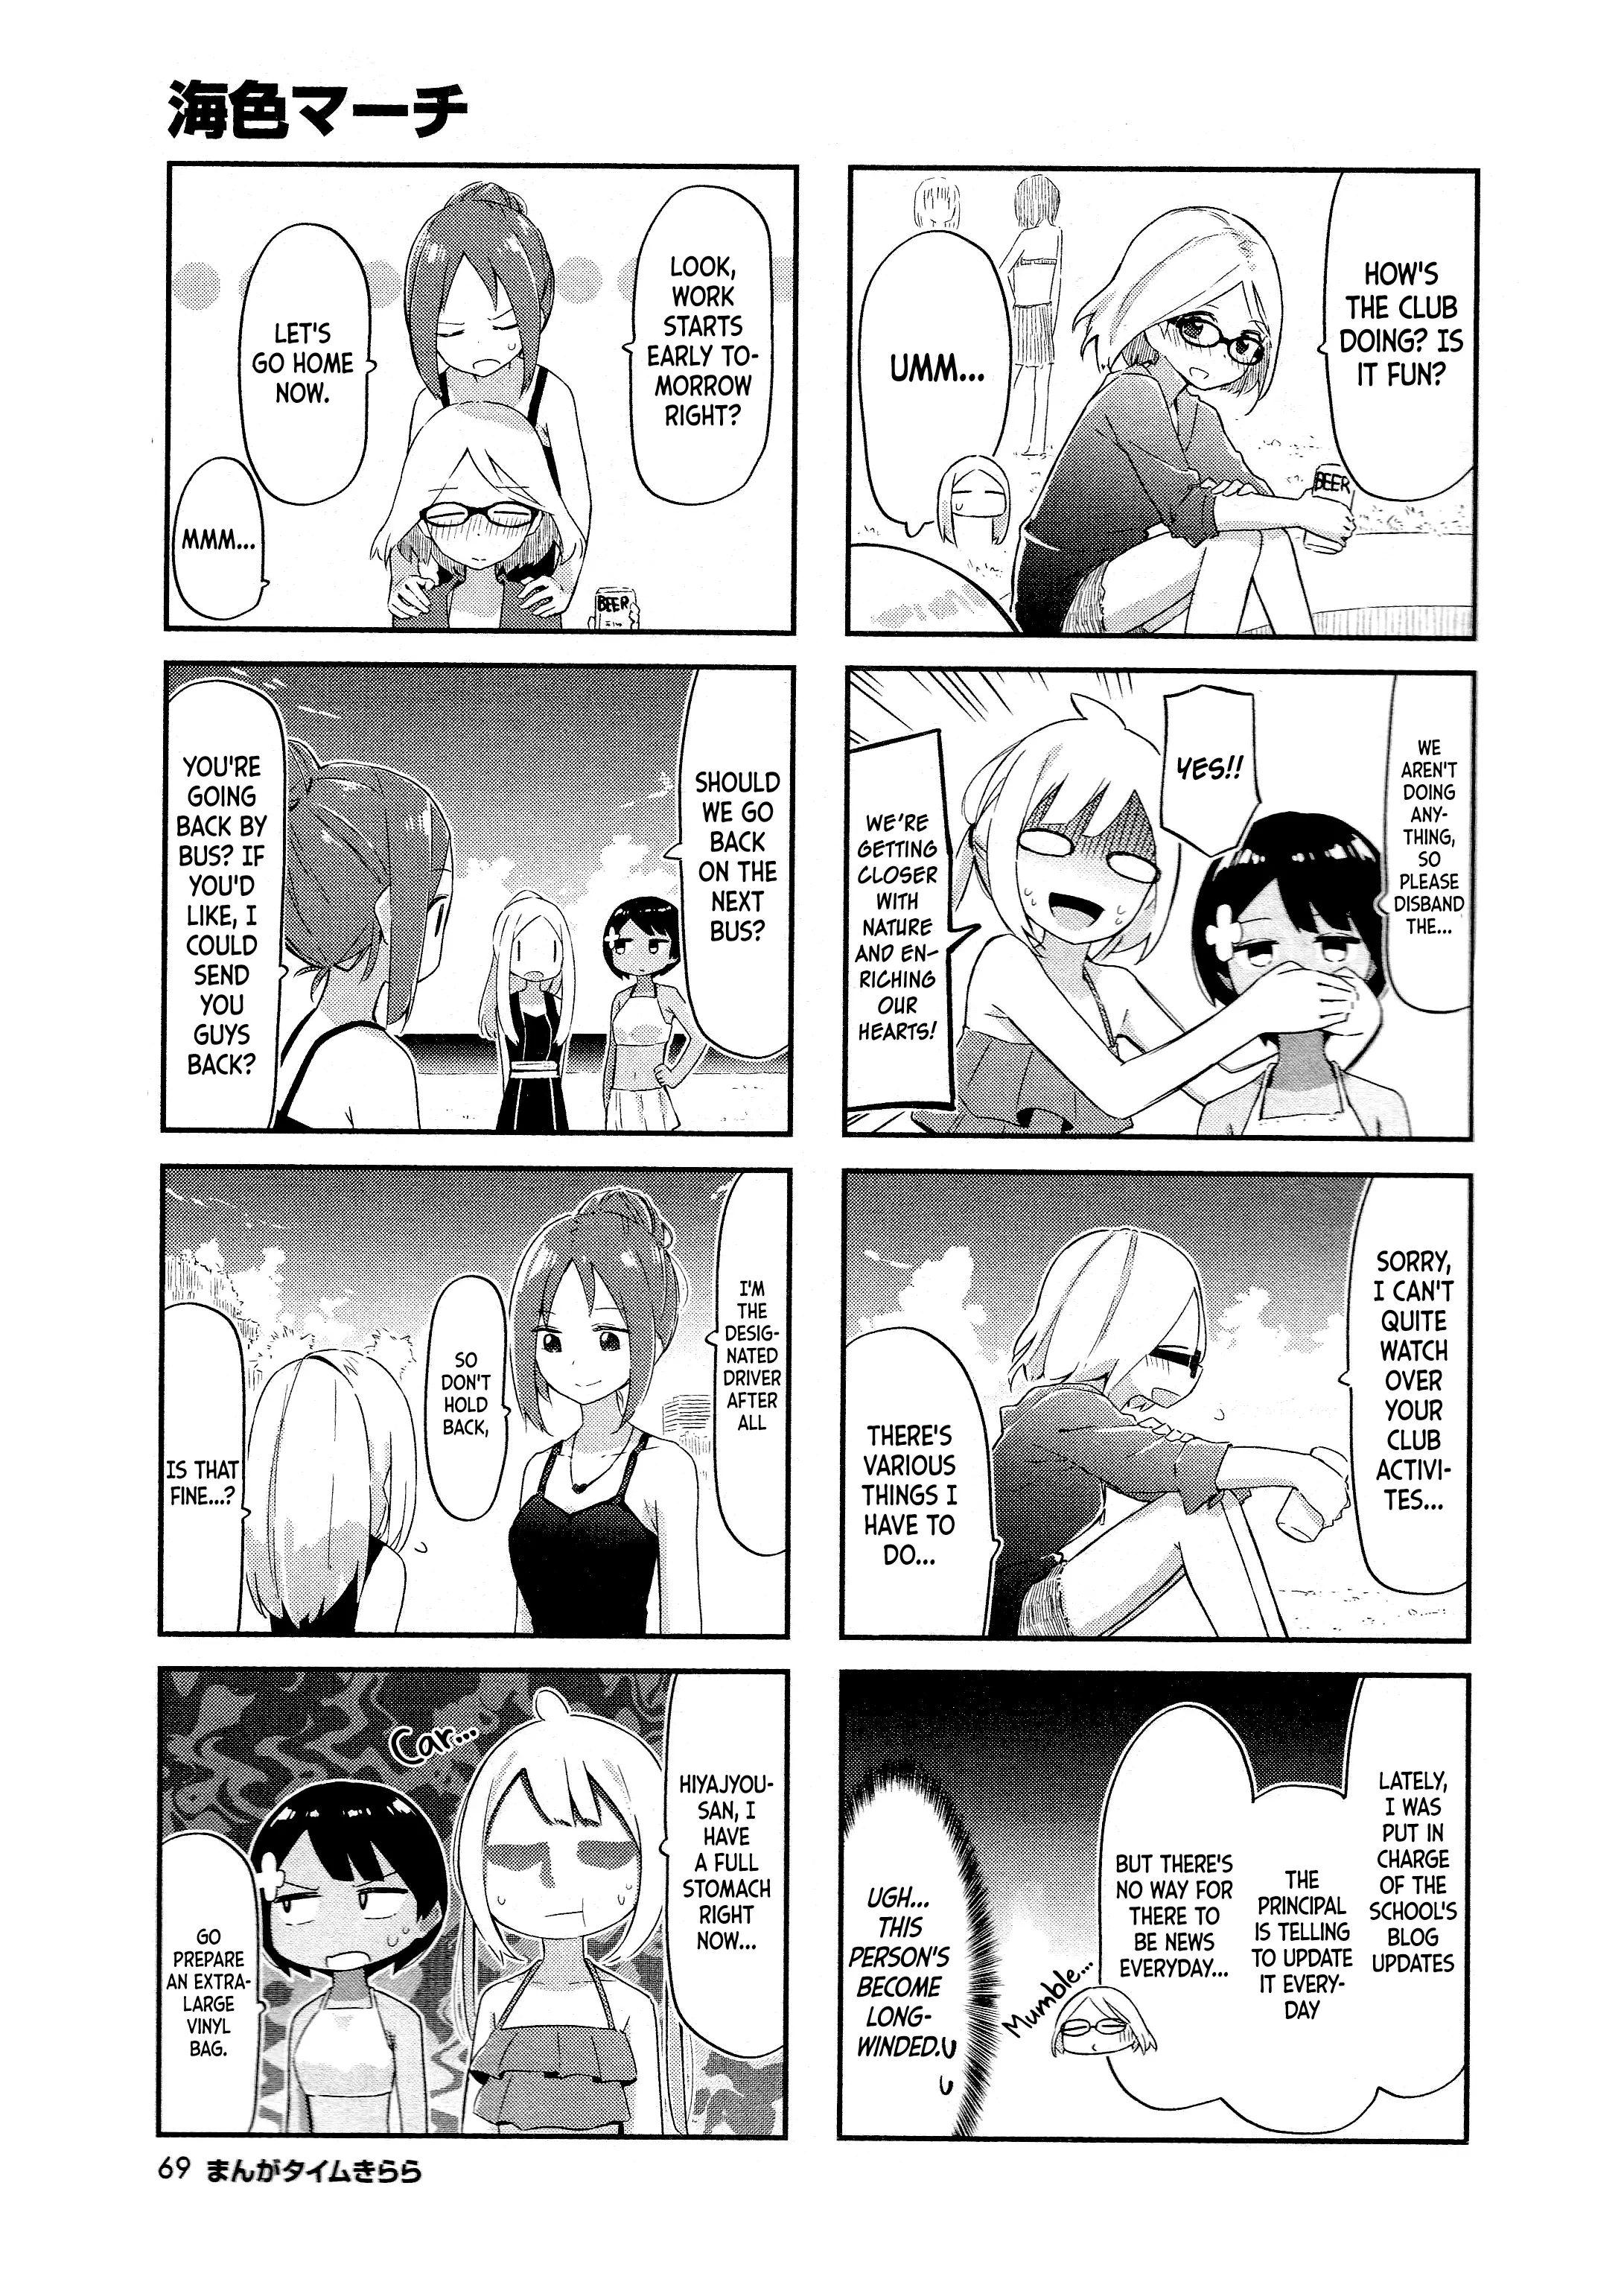 Umiiro March - 9 page 6